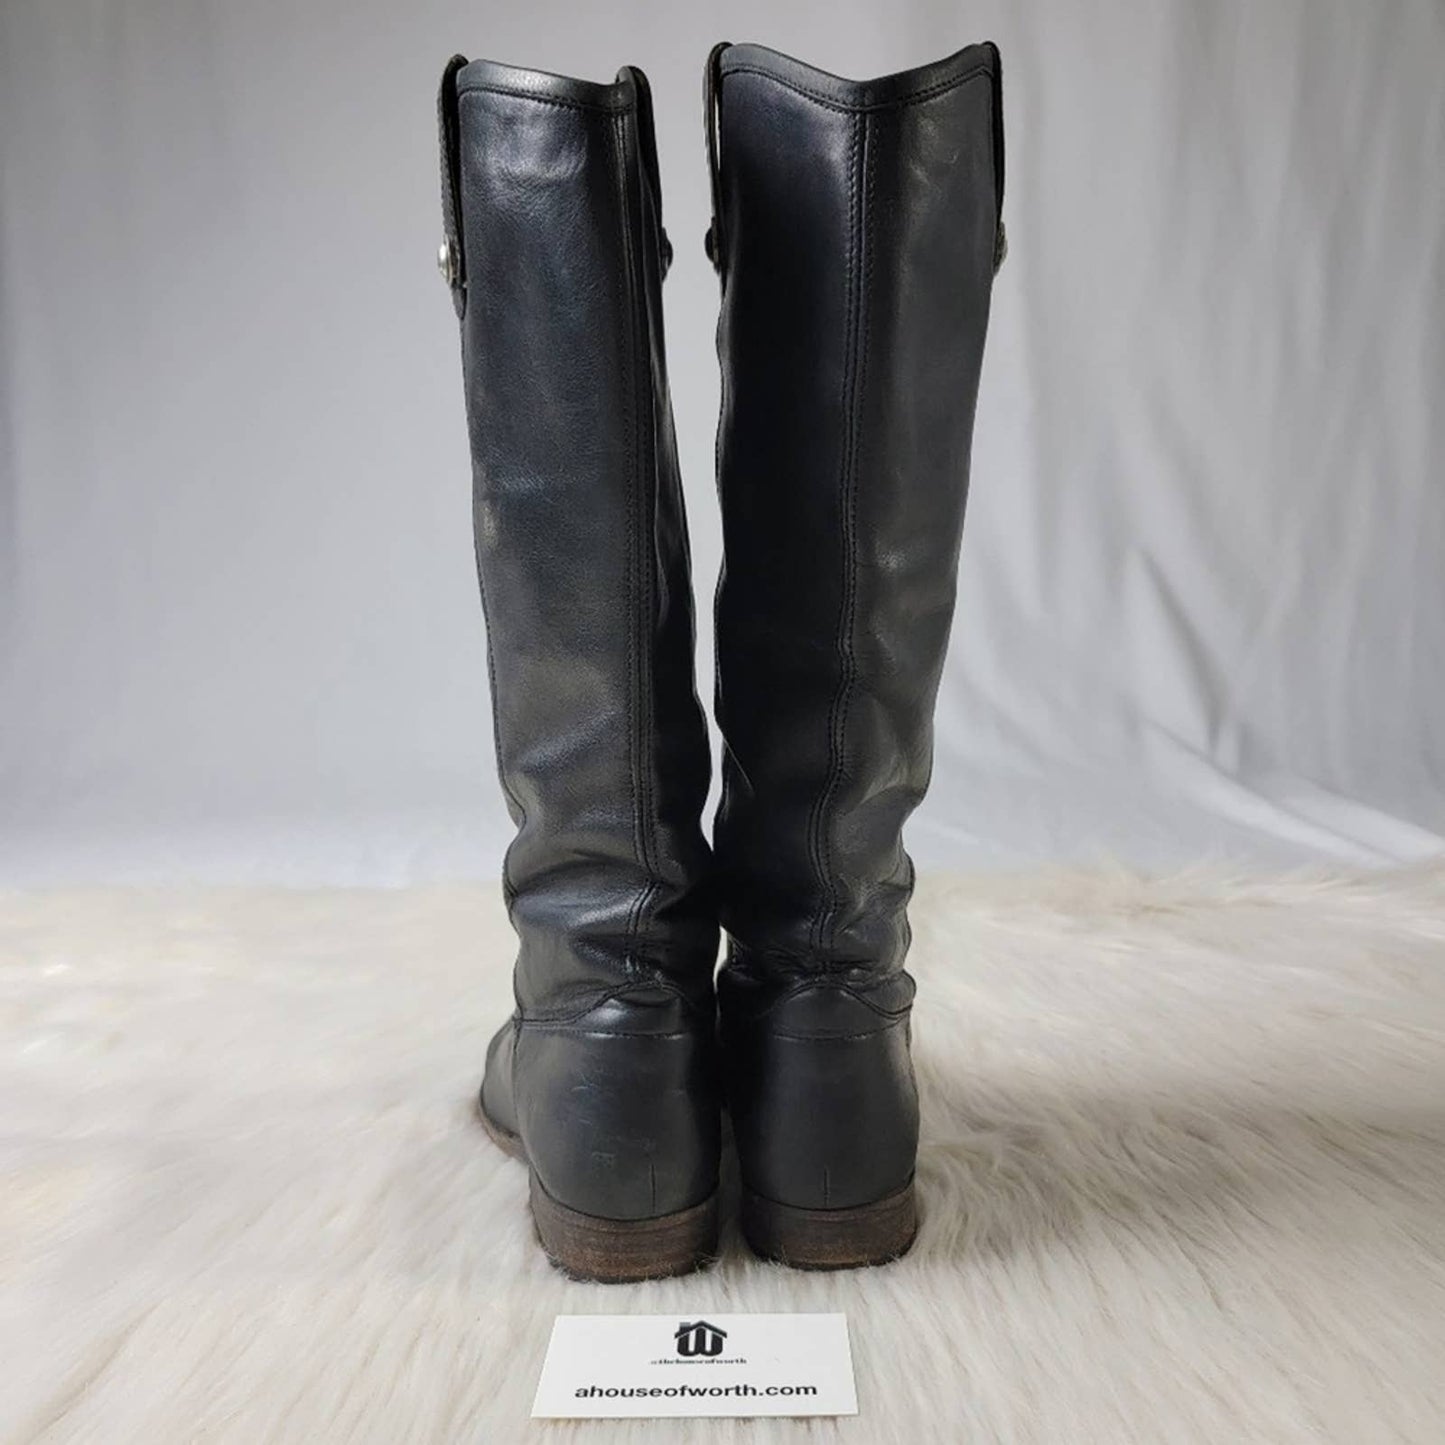 Frye Melissa Knee High Leather Boots in Black - 7